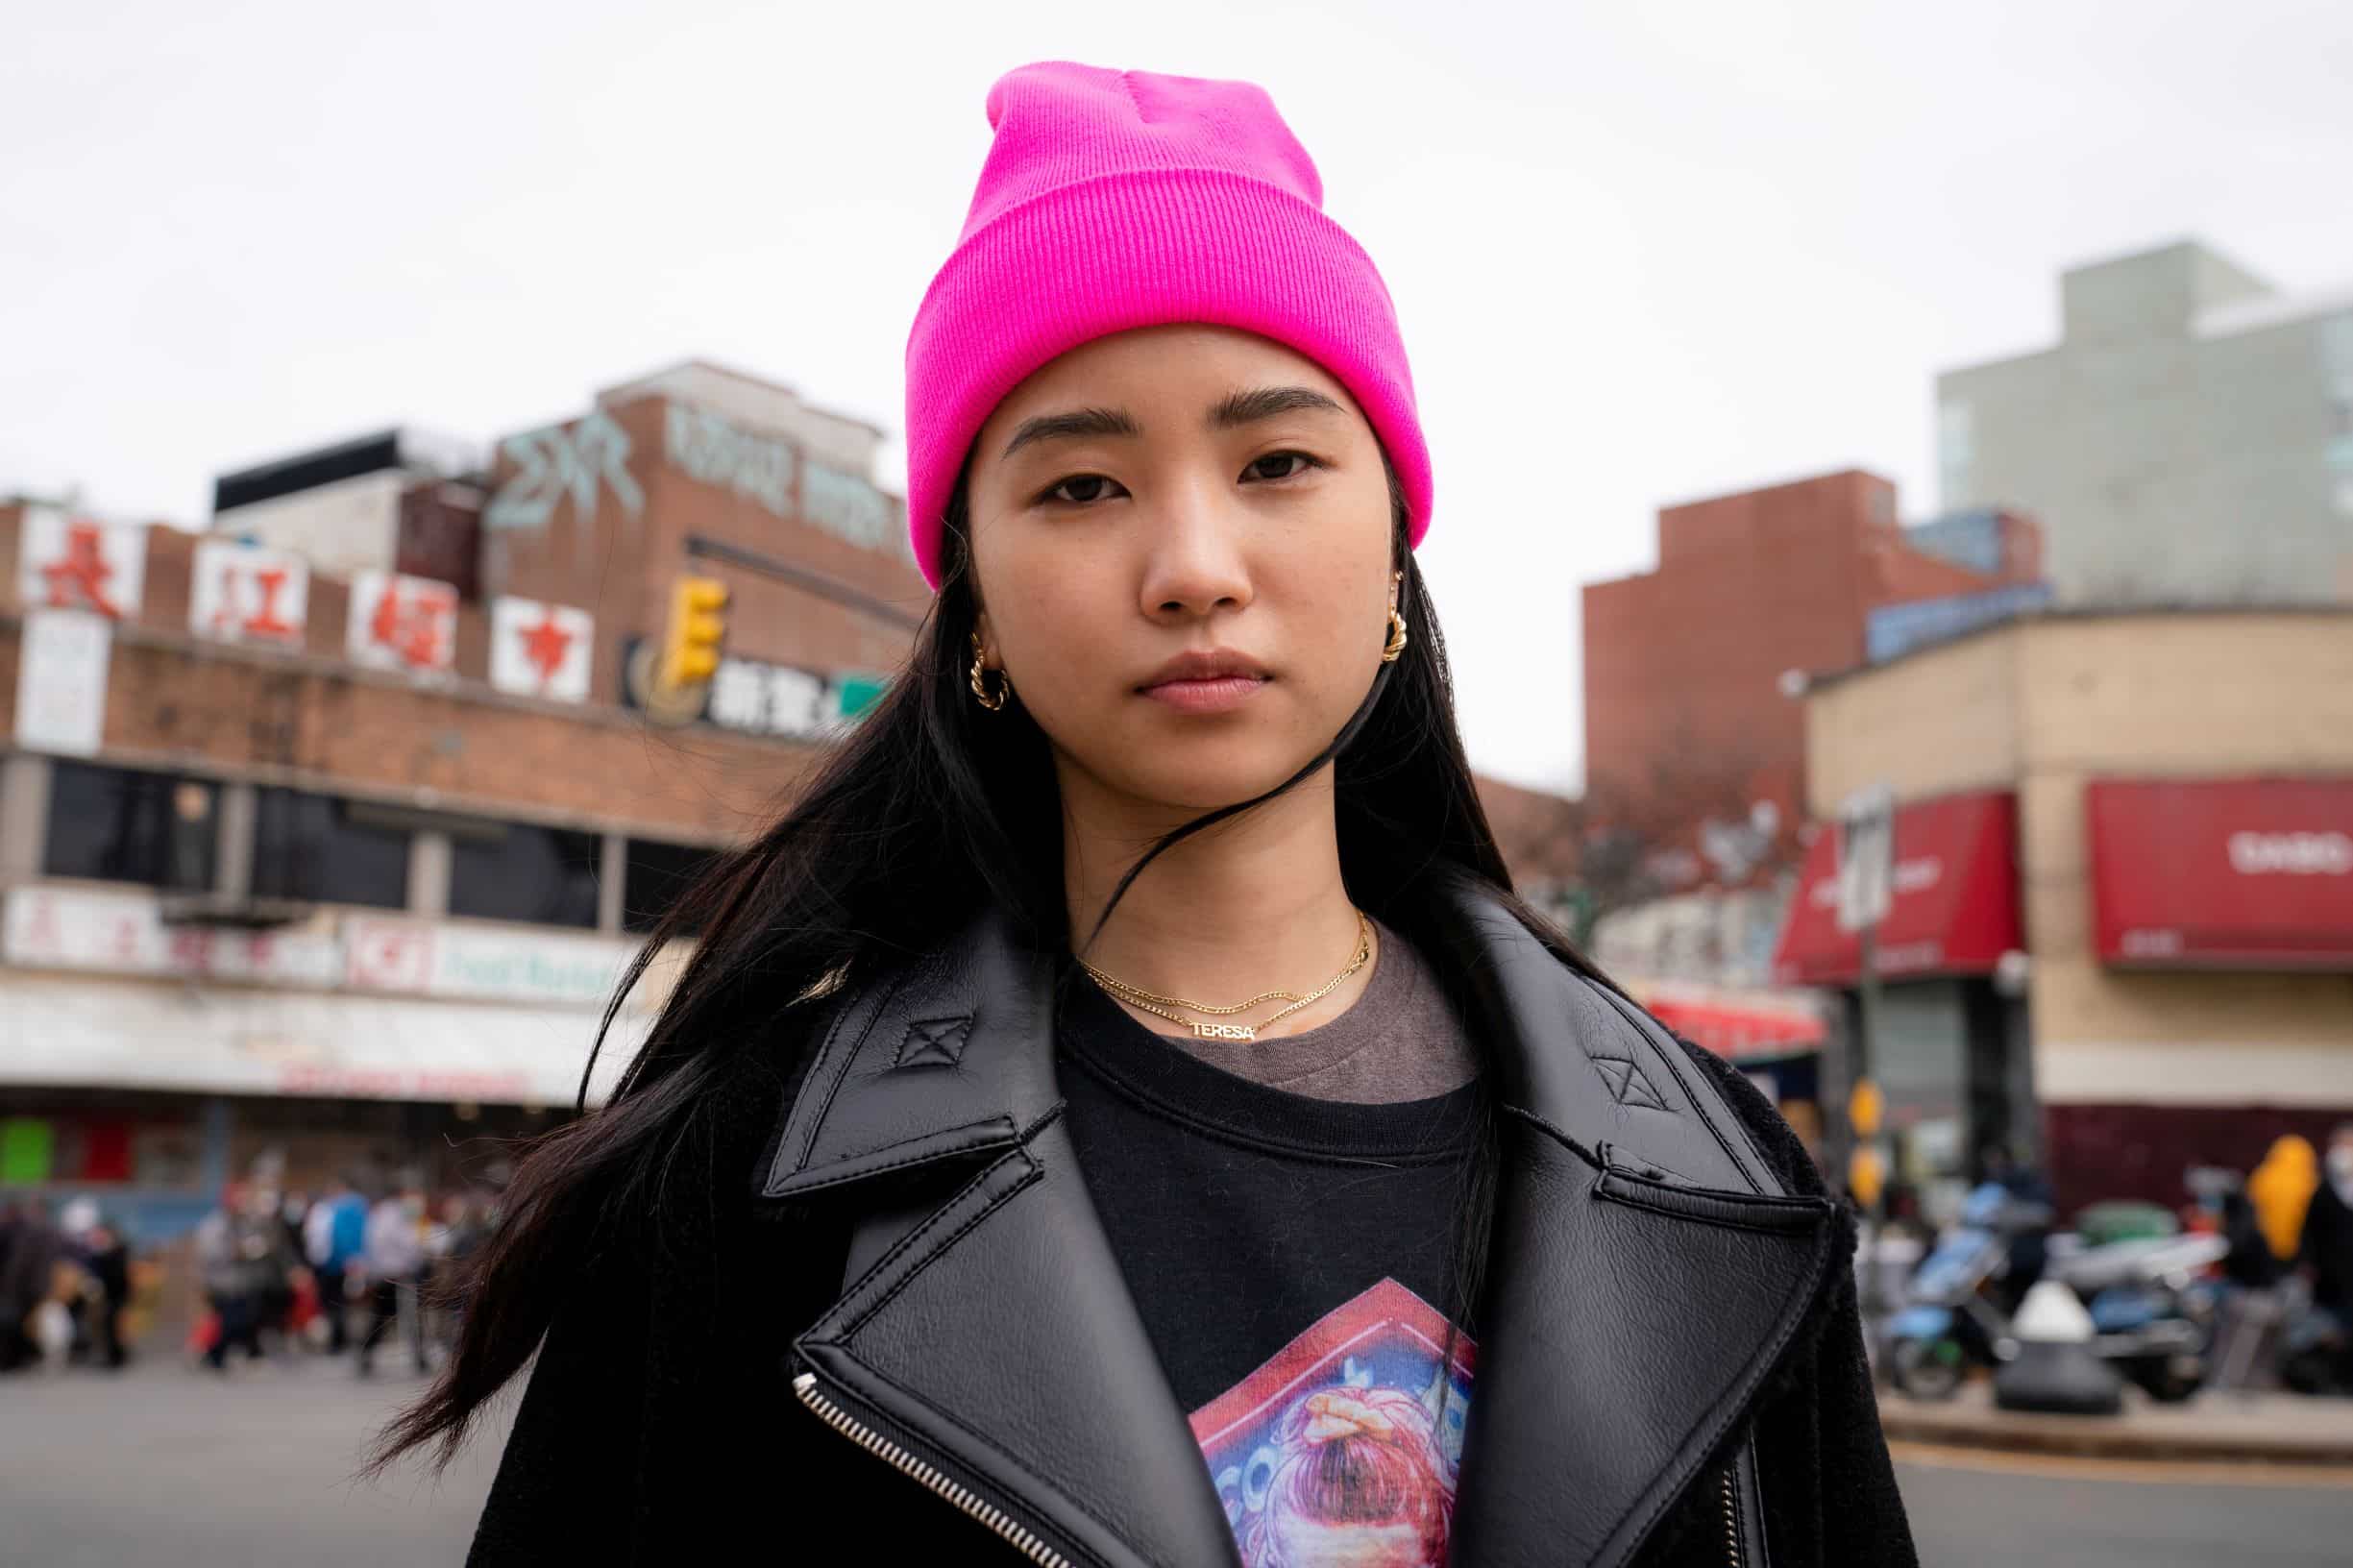 Younger AAPI Taking the Helm to Combat Anti-Asian Violence